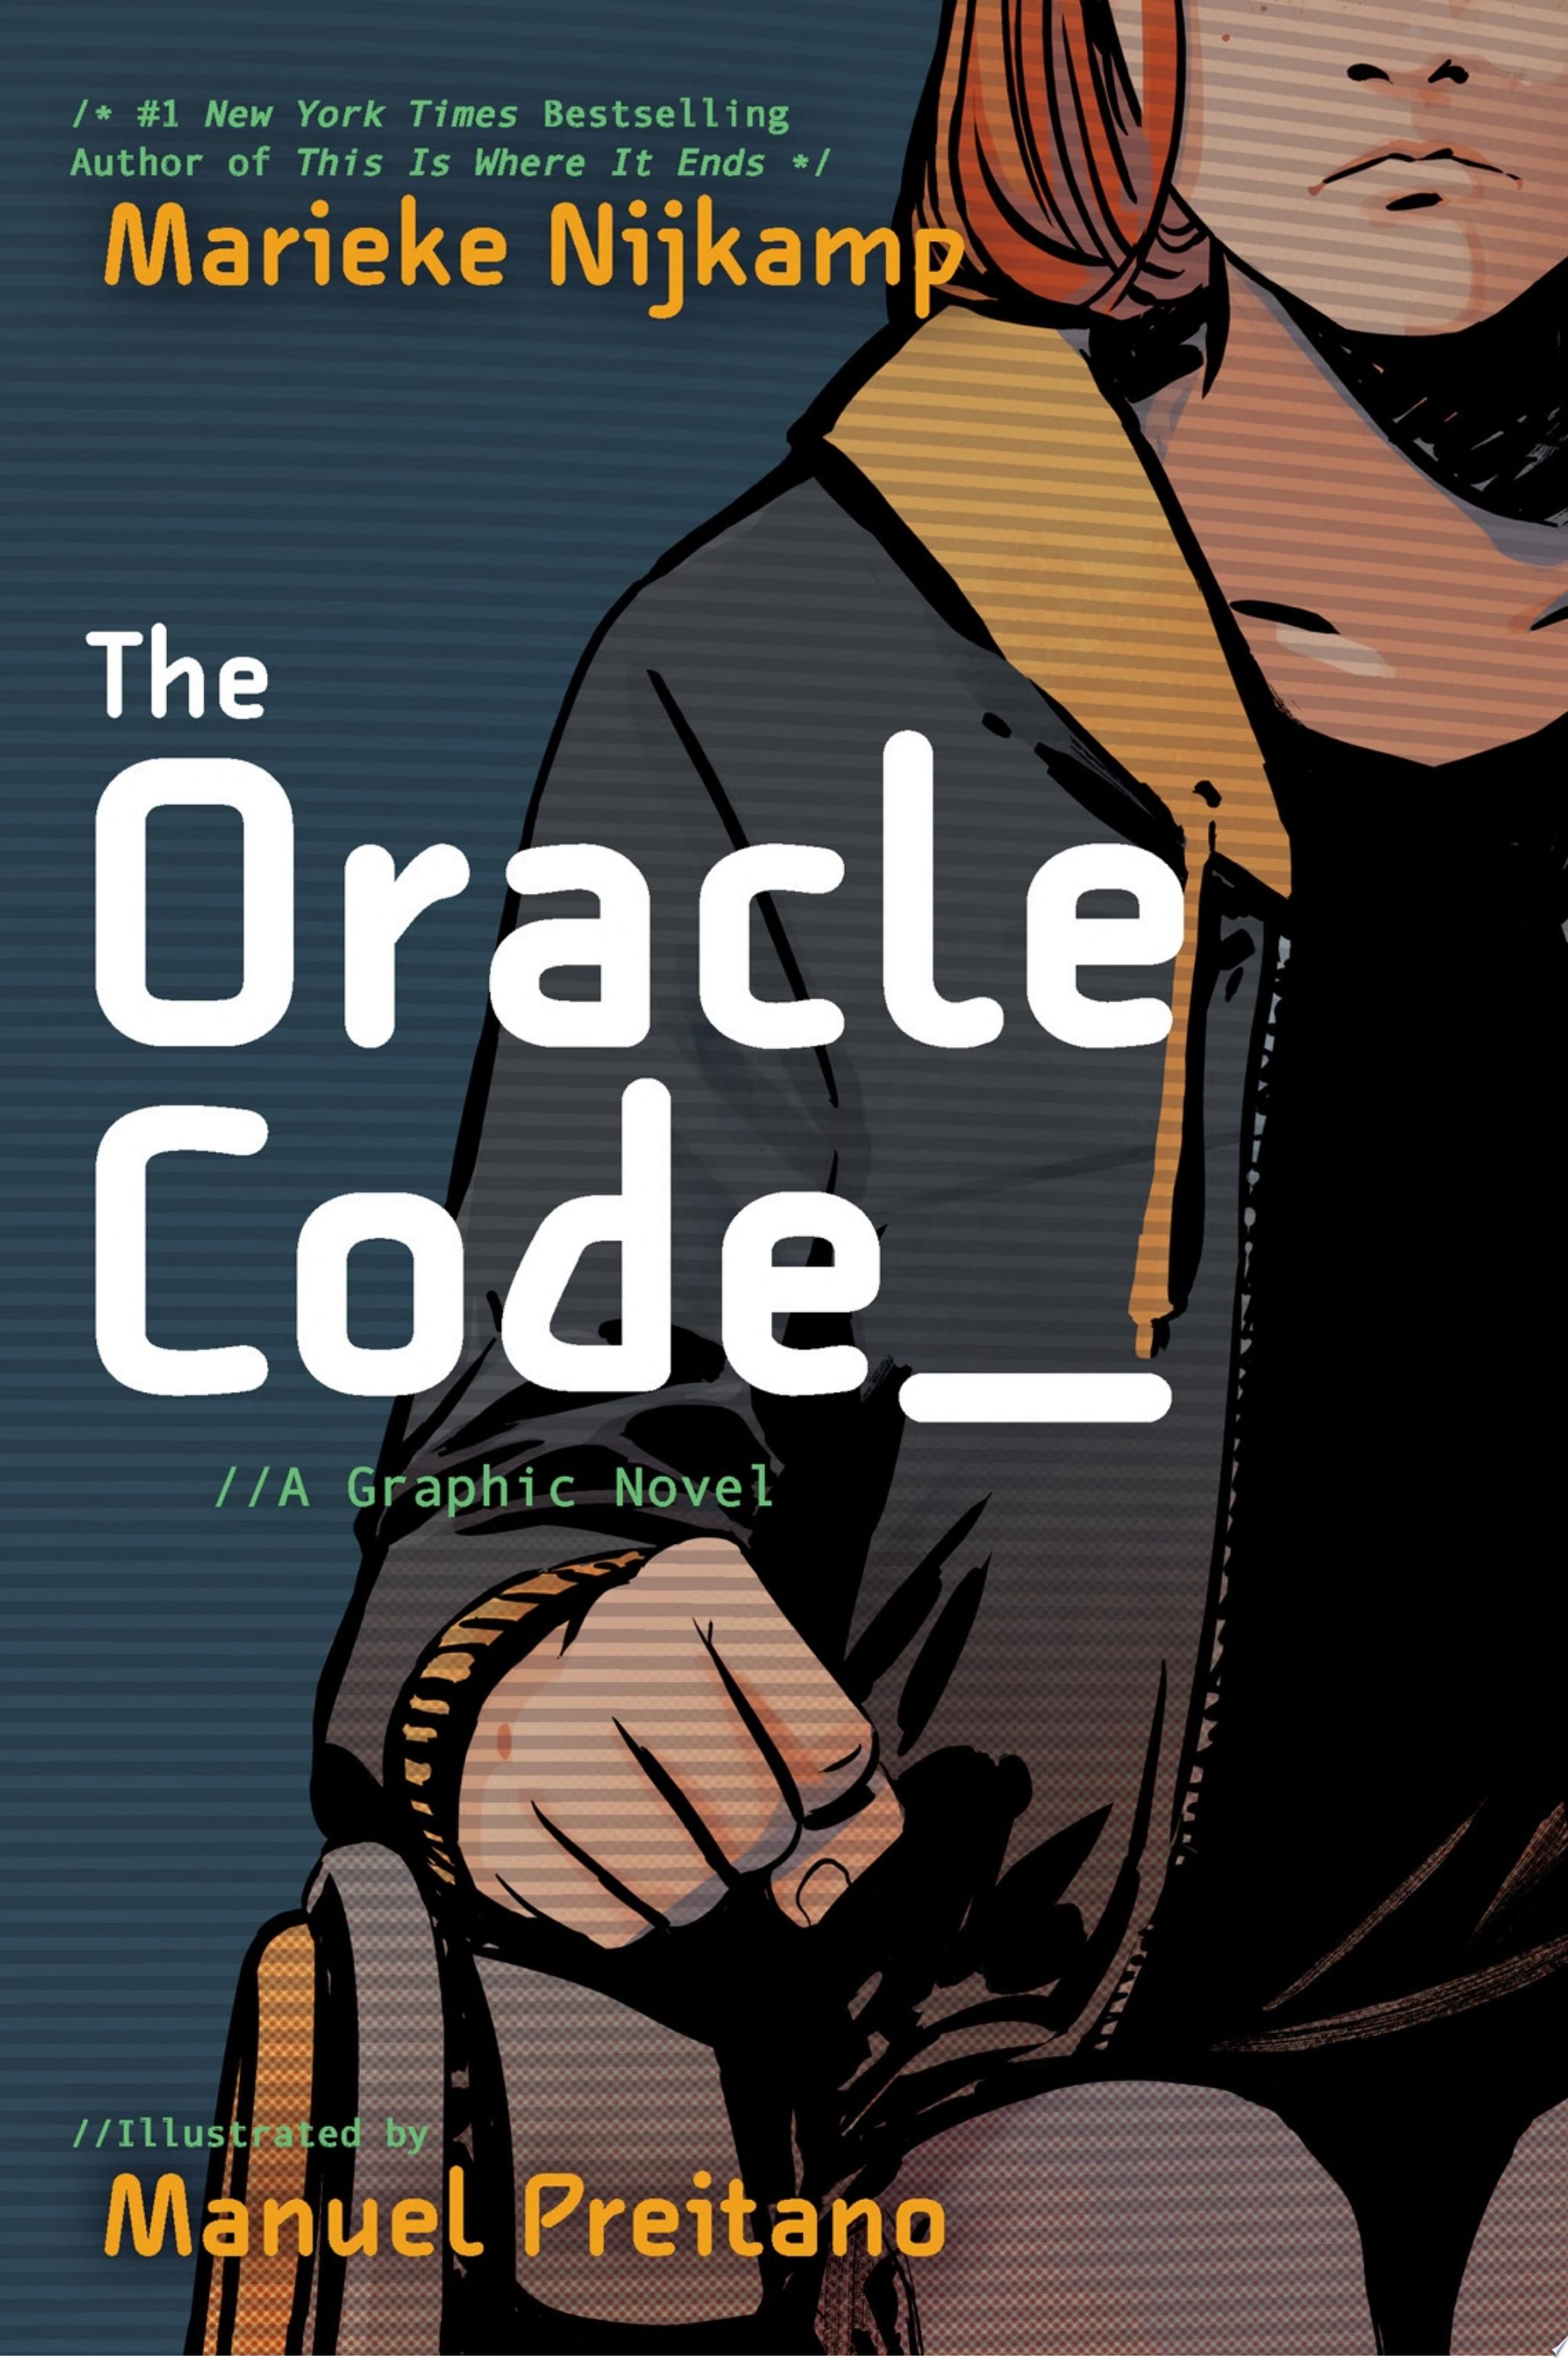 Image for "The Oracle Code"